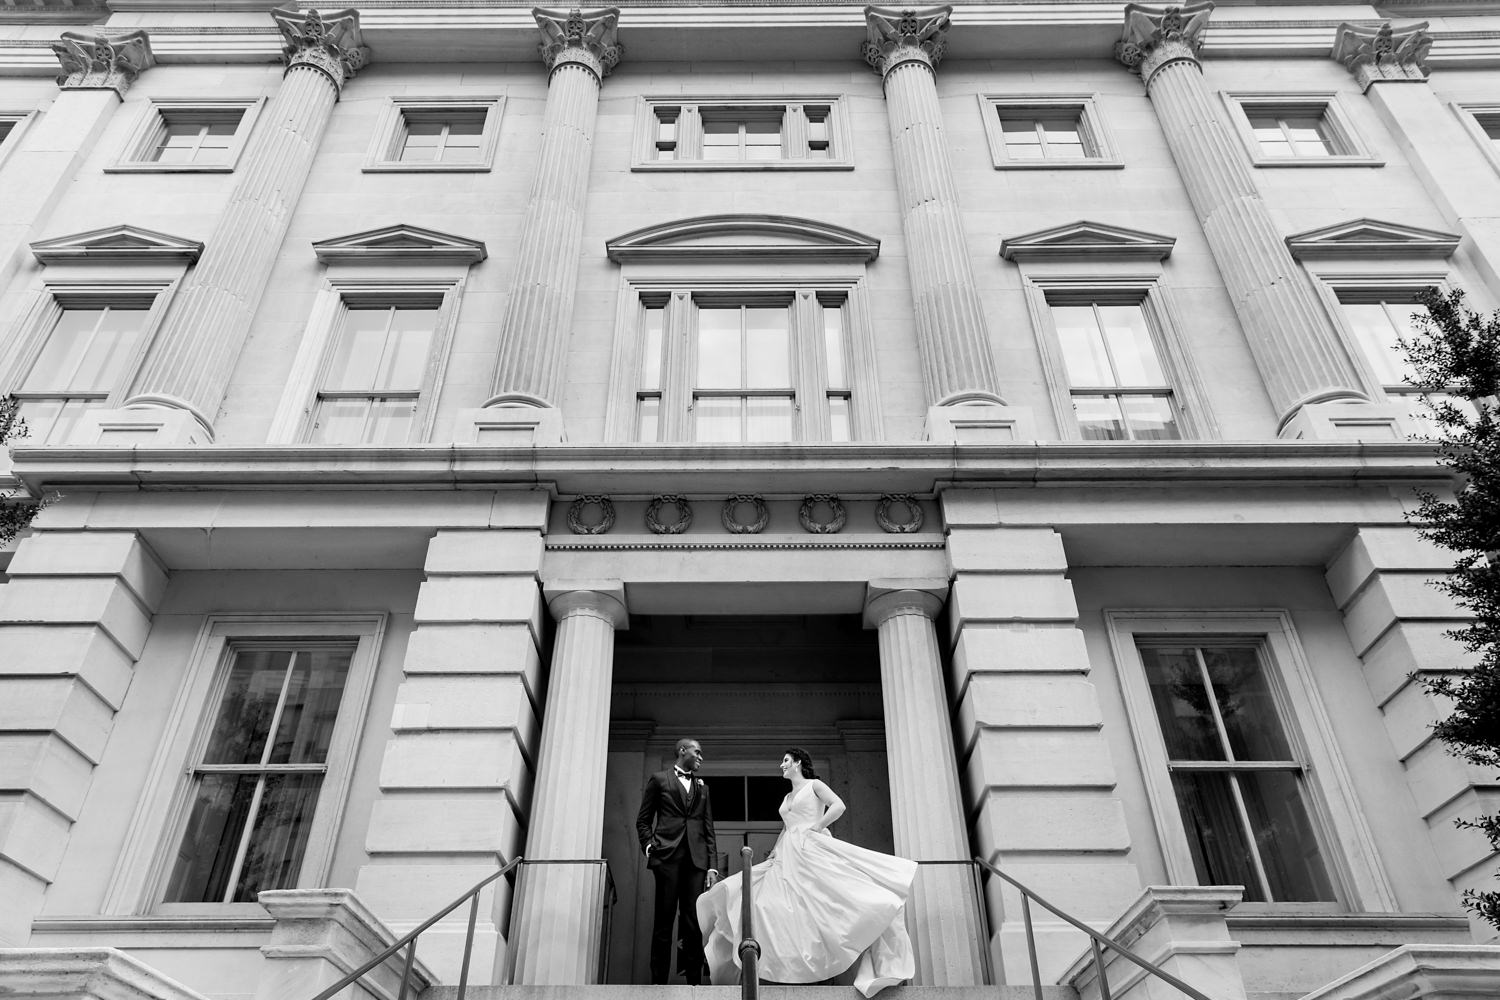 This wedding had bride and groom prep at the hotel Monaco in Chinatown, Washington DC, these are portraits just outside of the hotel, the ceremony and reception were at the Newseum, the bride is swishing her dress, the groom is admiring her and you can see the whole side of the building, this is a black and white photo, the groom is black and the bride is white, Procopio Photography, best top Washington DC photographer, best top Maryland photographer, best top Virginia photographer, best top DMV photographer, best top wedding photographer, best top commercial photographer, best top portrait photographer, best top boudoir photographer, modern fine art portraits, dramatic, unique, different, bold, editorial, photojournalism, award winning photographer, published photographer, memorable images, be different, stand out